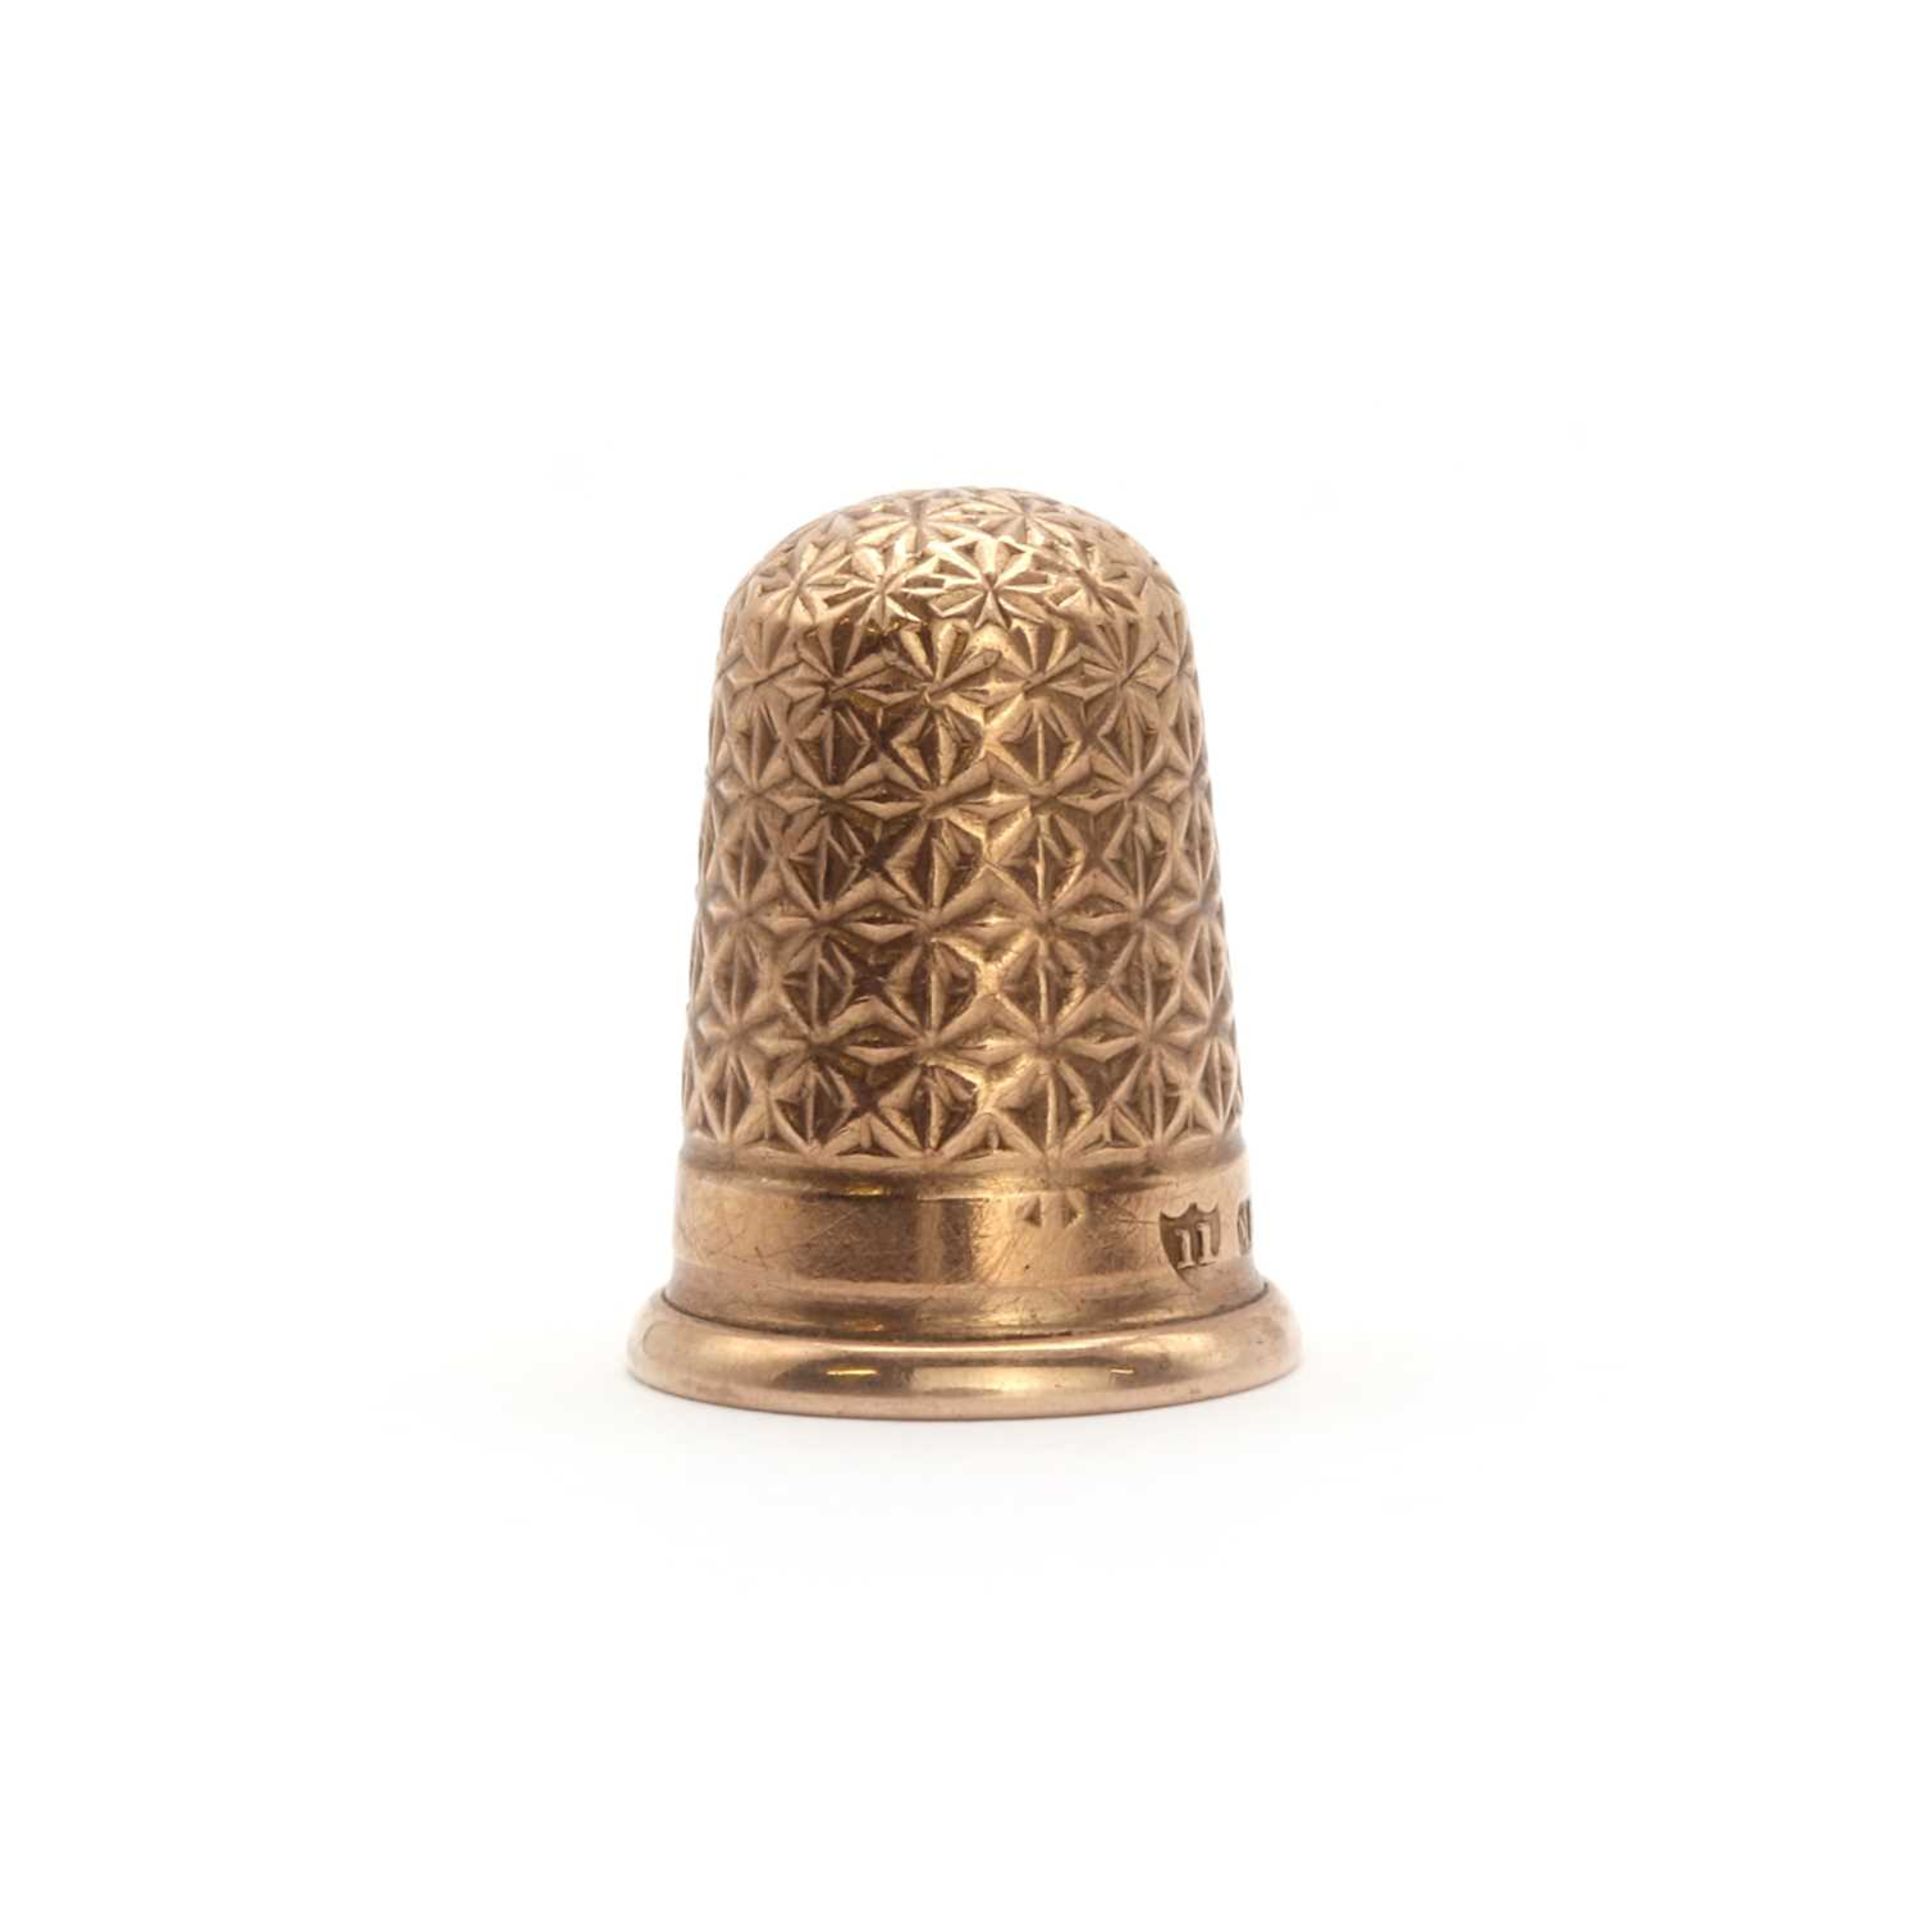 A 9ct gold engraved thimble,